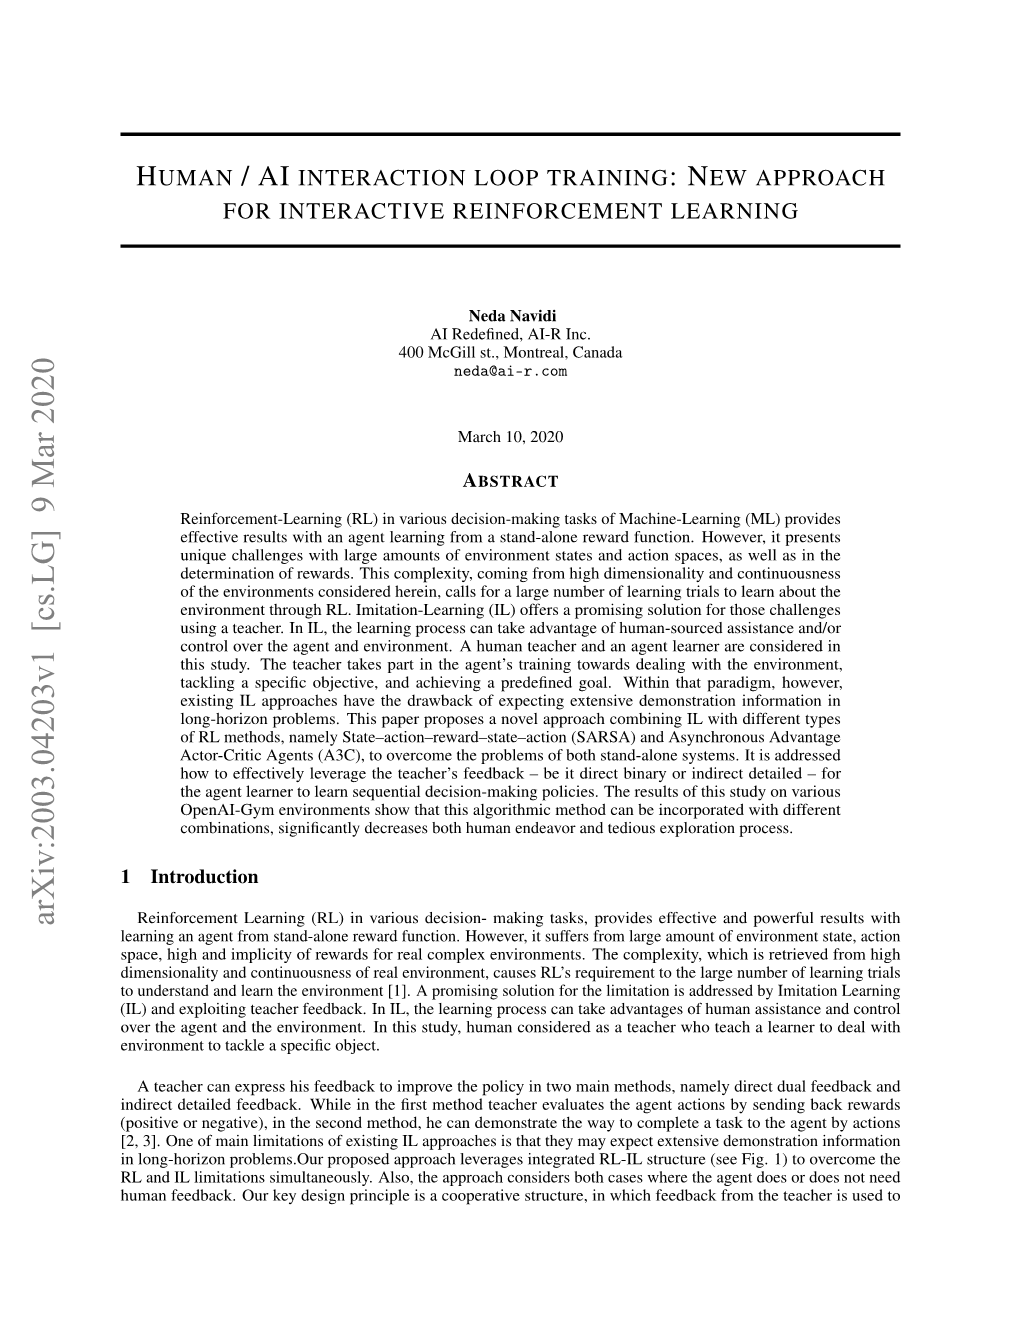 Human AI Interaction Loop Training: New Approach for Interactive